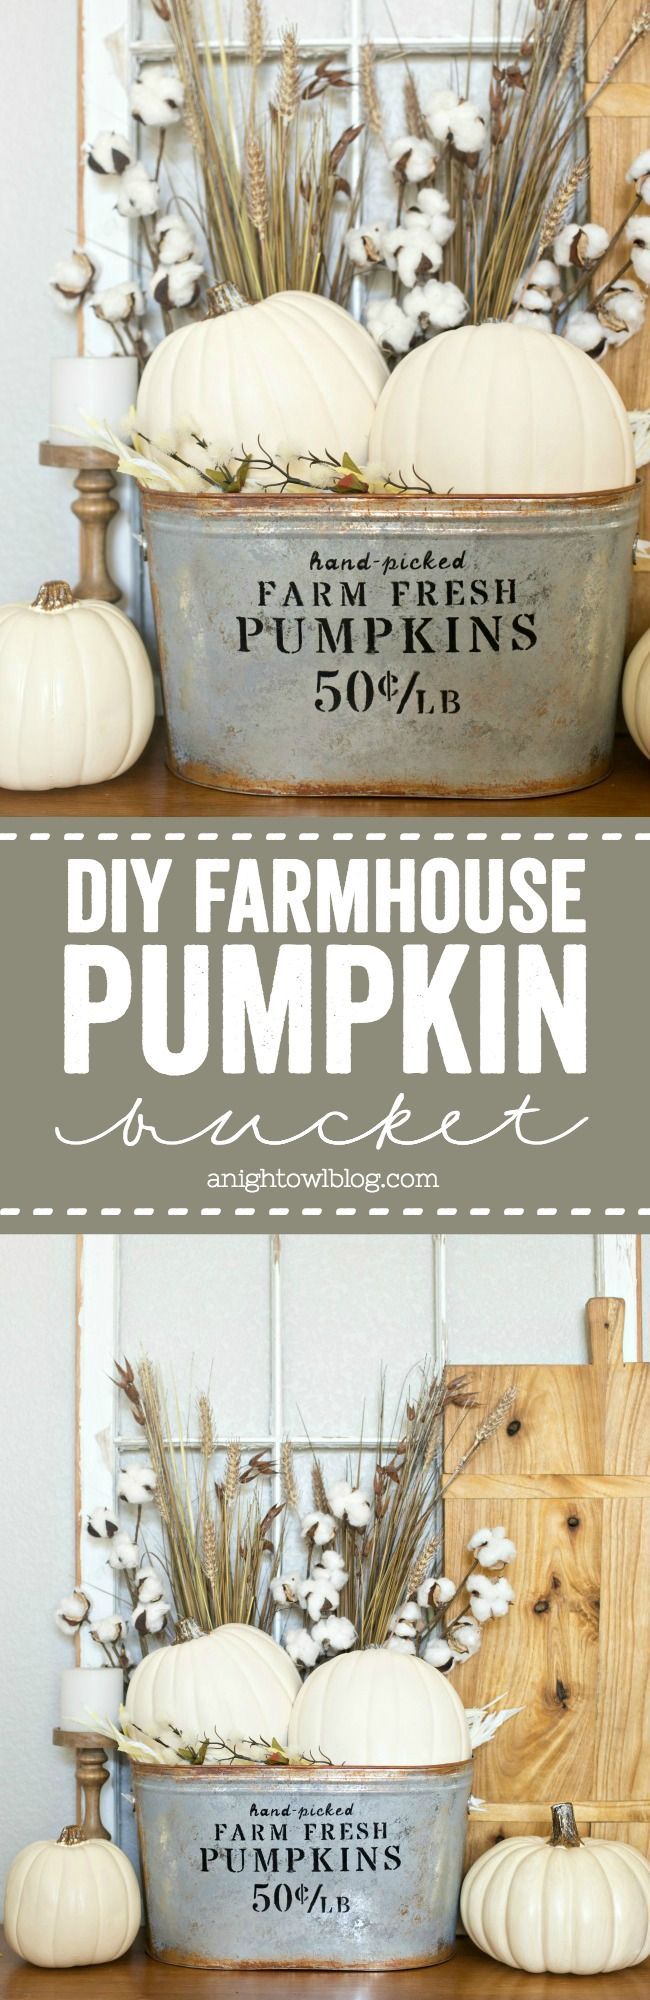 There’s nothing better than the farmhouse look for Fall! Make your own DIY Farmhouse Pumpkin Bucket in just a few easy steps!